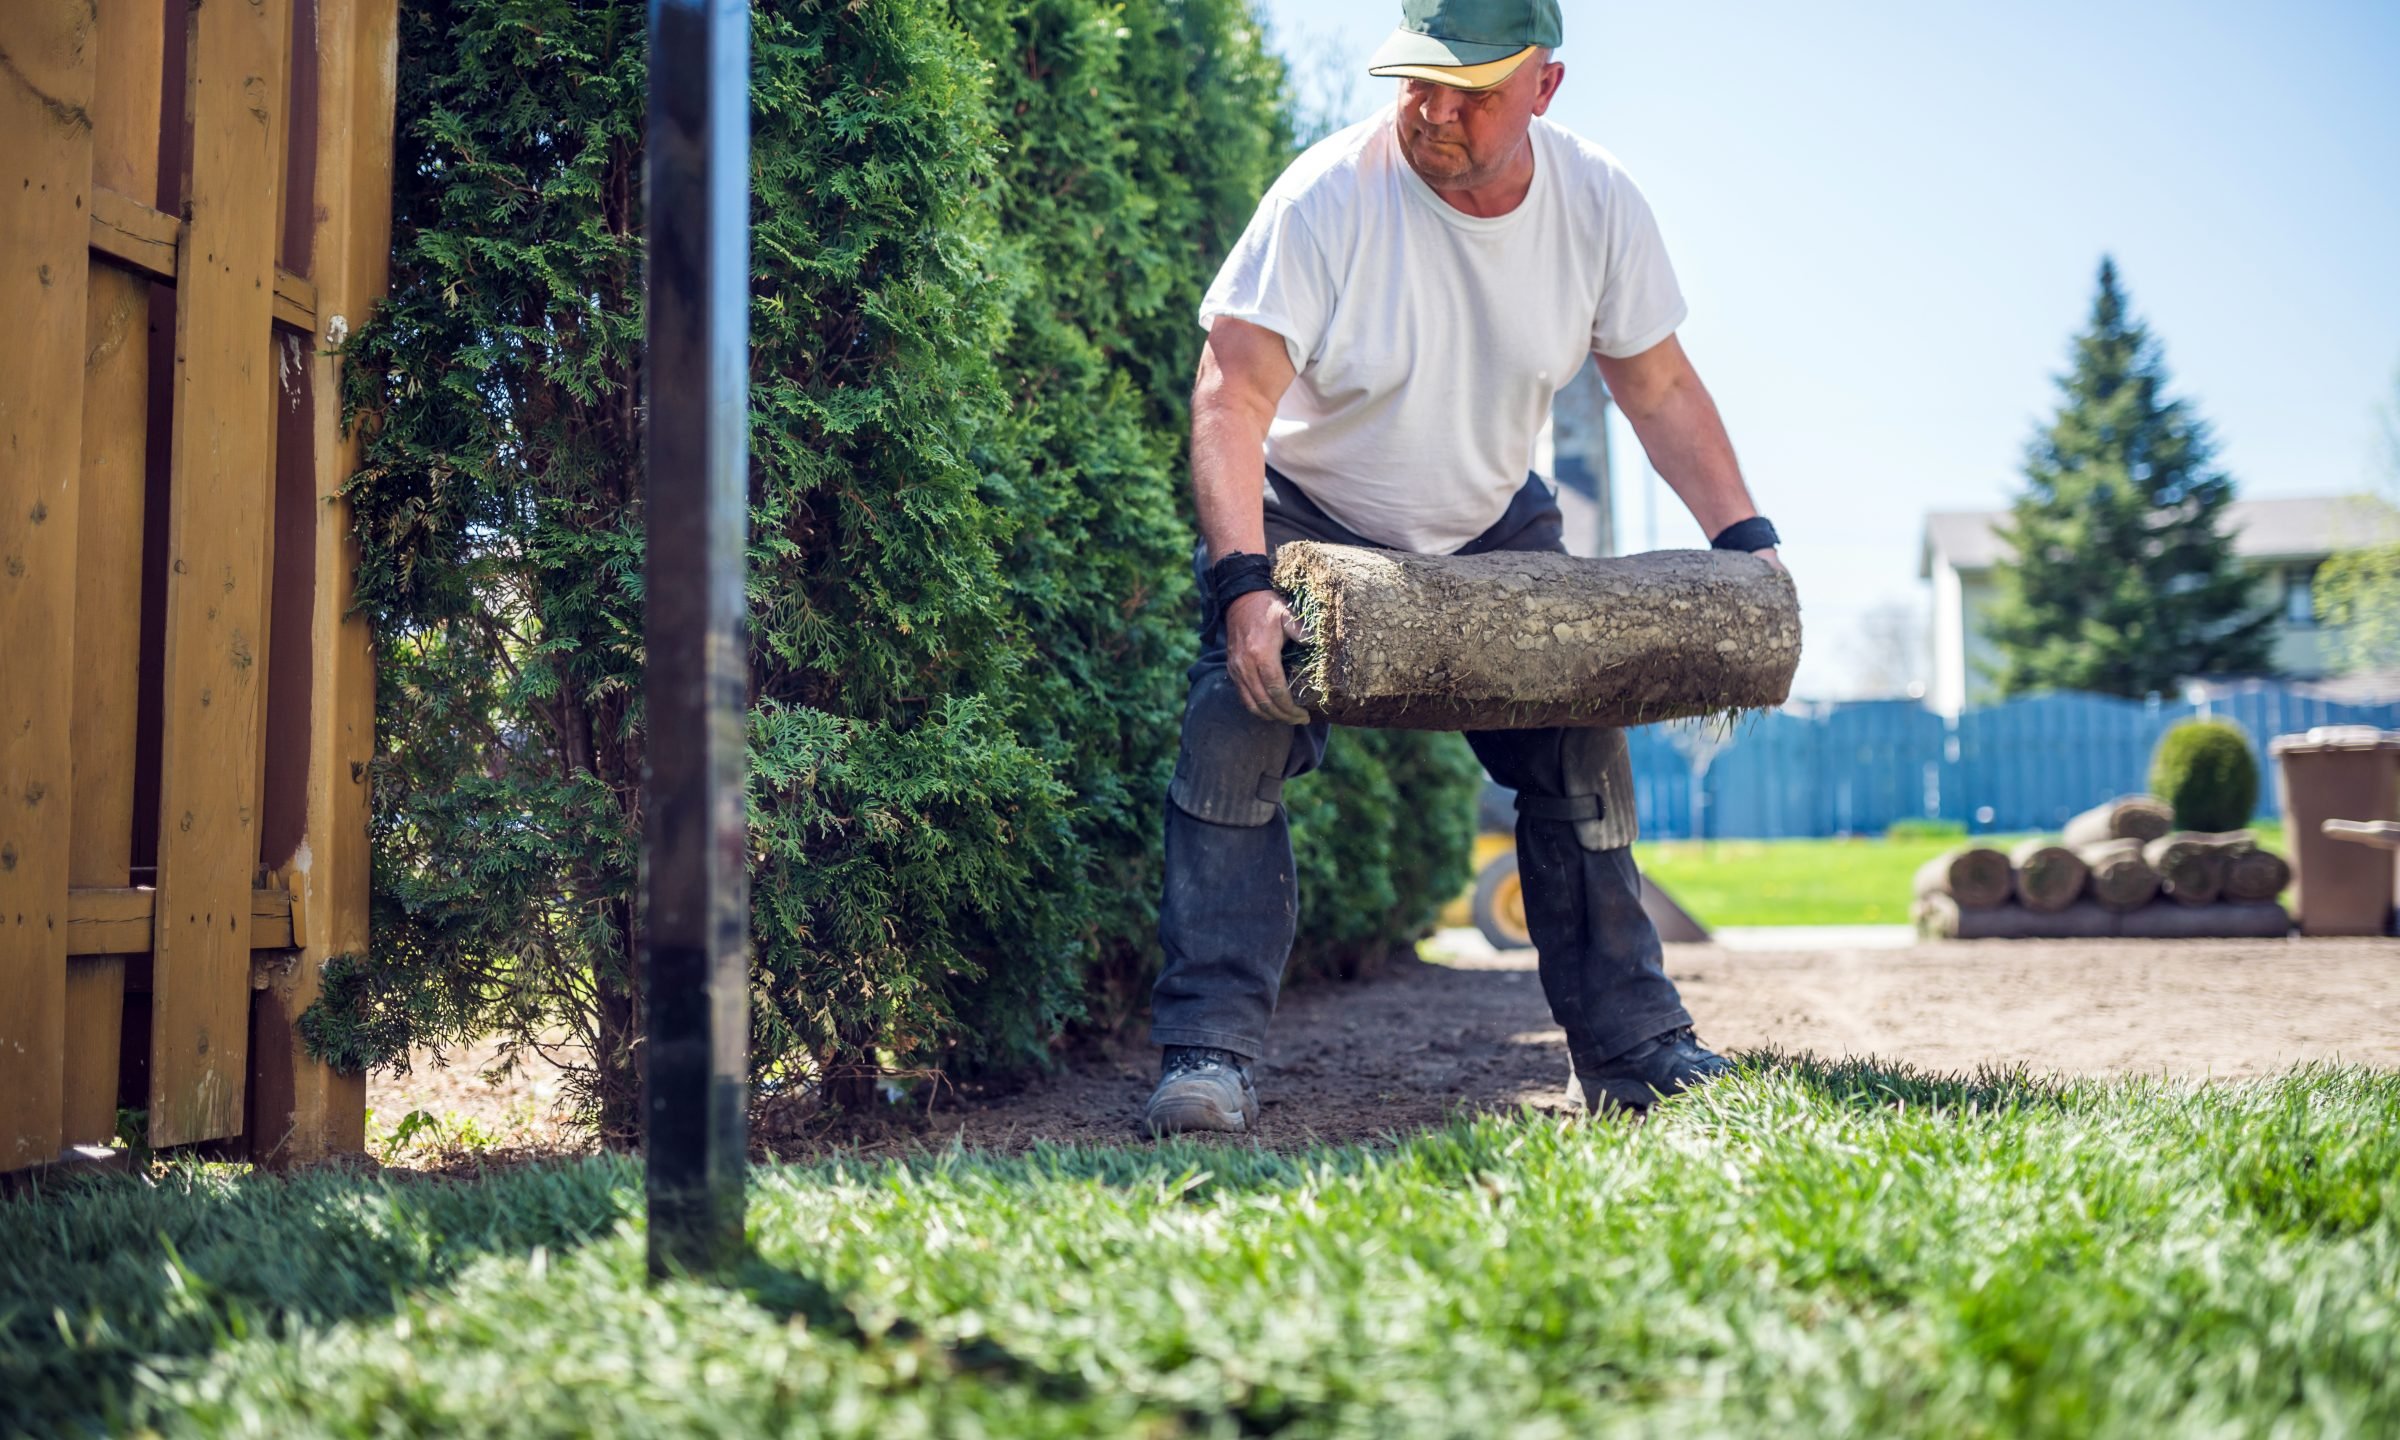 A Landscaping Or Lawn Care Business, How Much Should A Landscaper Get Paid